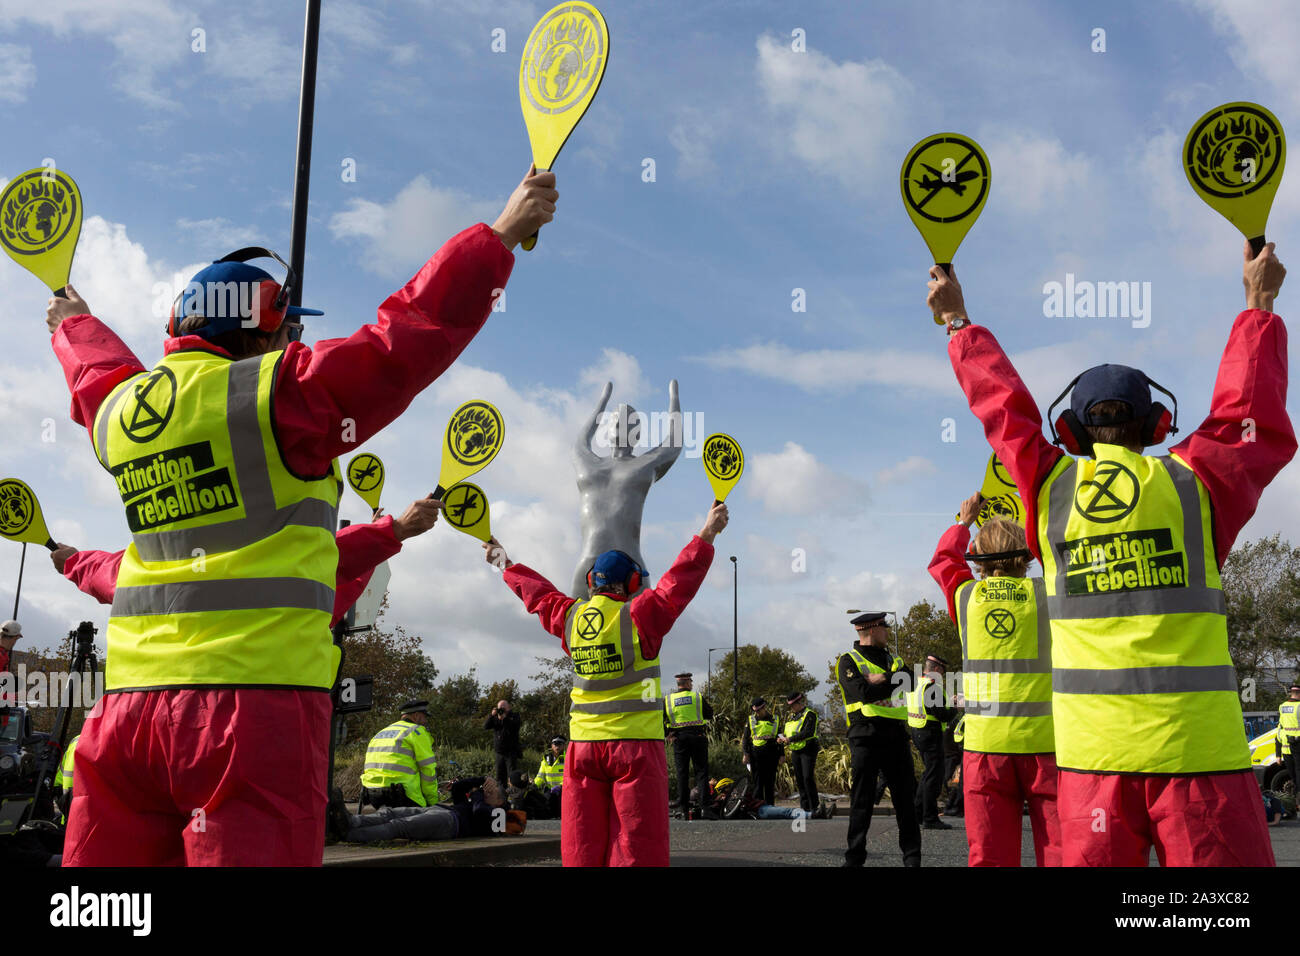 Environmental activist protest about Climate Change during the occupation of City Airport (London's Business Travel hub) in east London, the fourth day of a two-week prolonged worldwide protest by members of Extinction Rebellion, on 10th October 2019, in London, England. Stock Photo